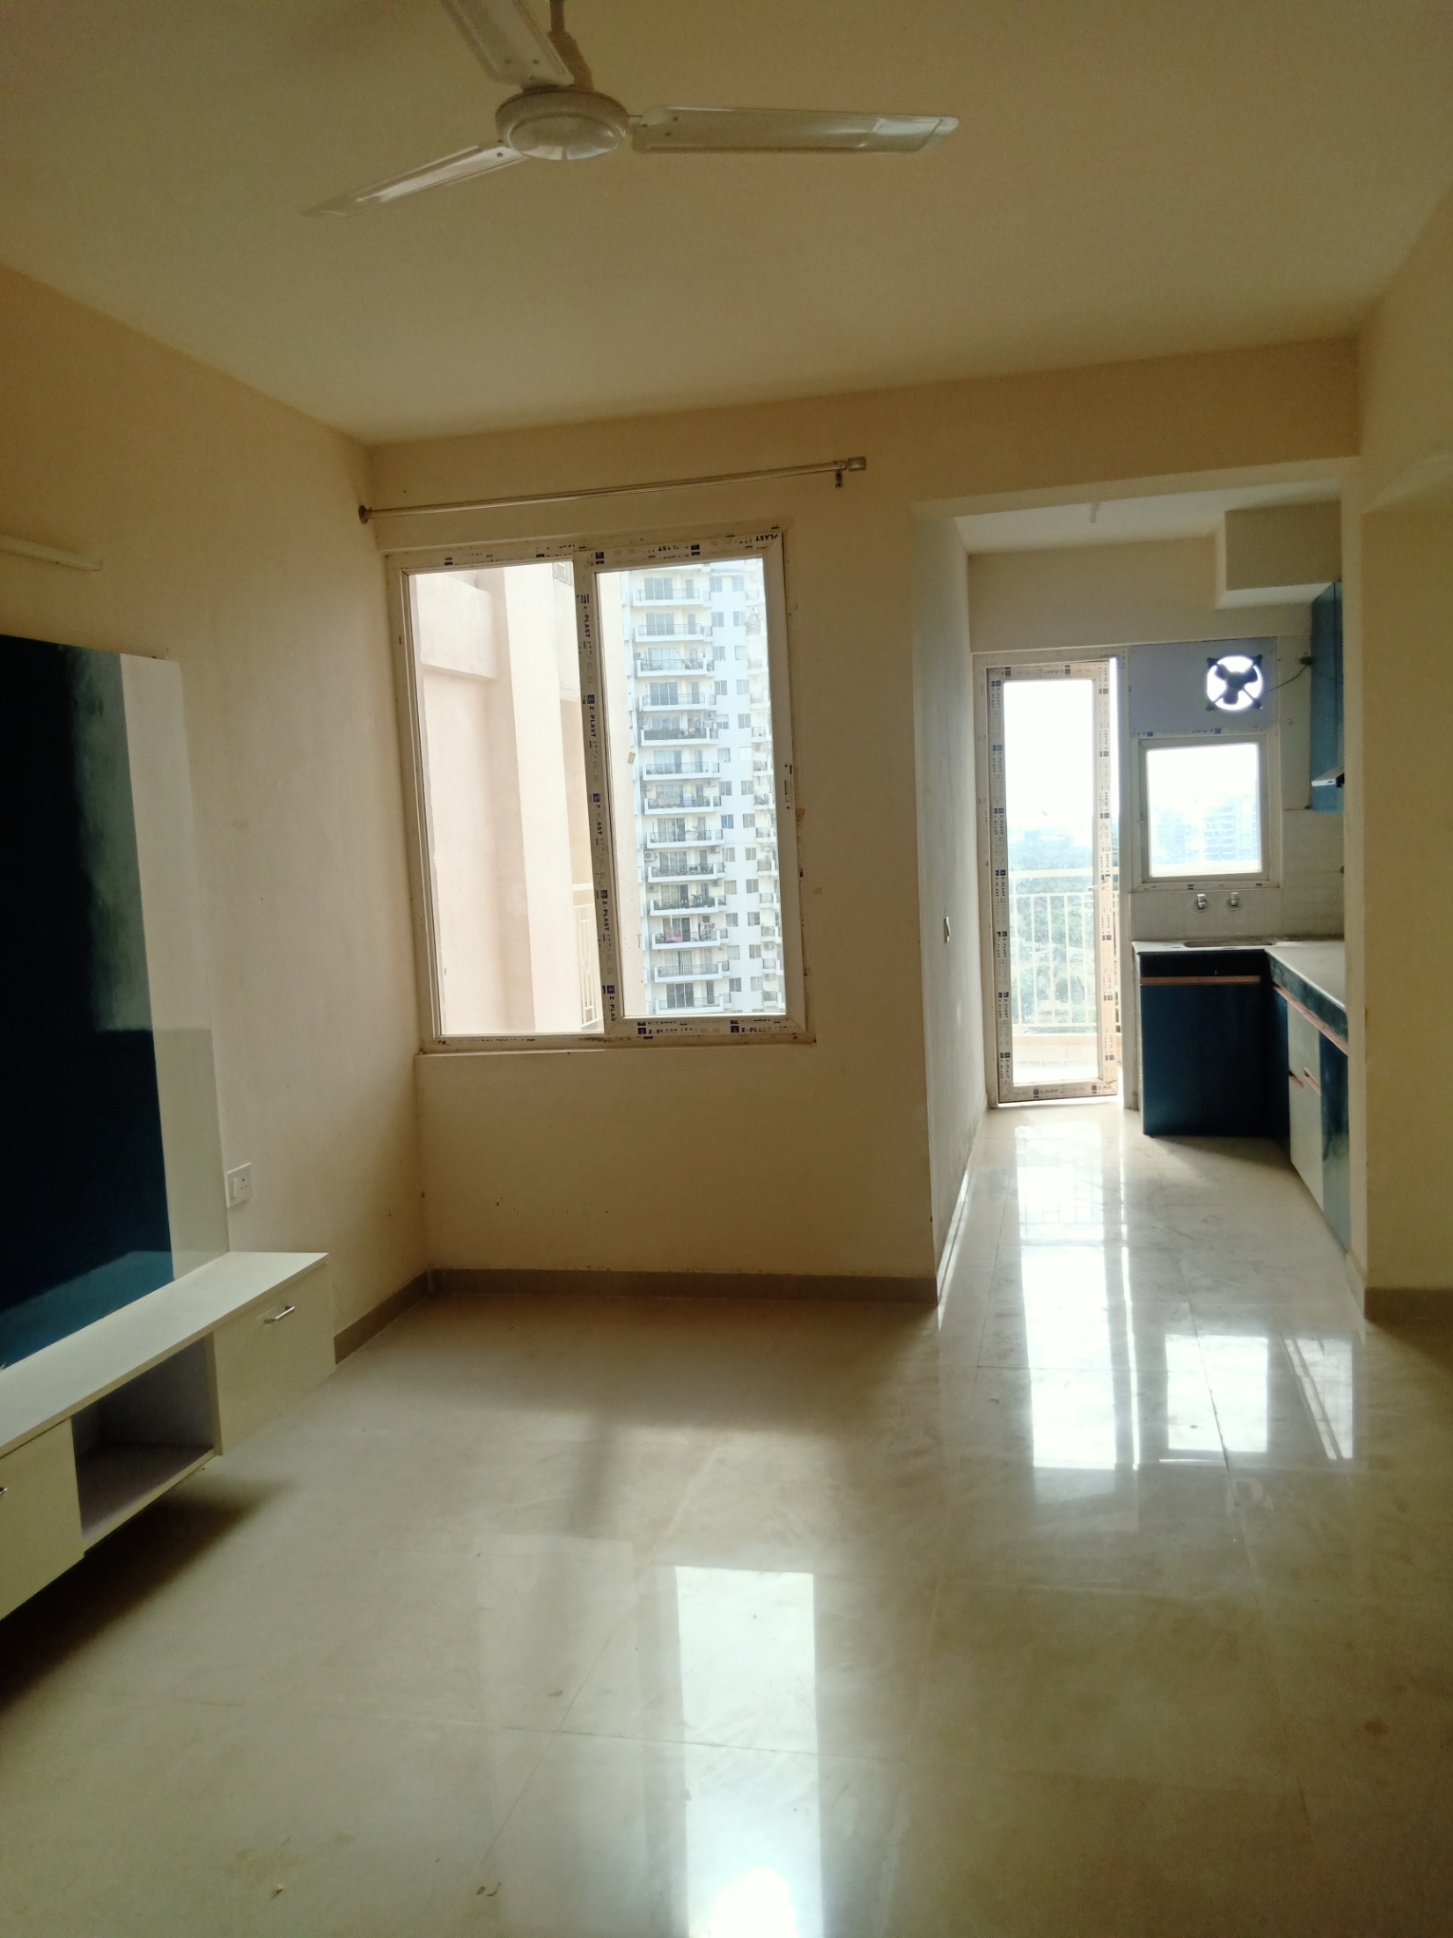 2 Bed/ 2 Bath Rent Apartment/ Flat; 710 sq. ft. carpet area, Semi Furnished for rent